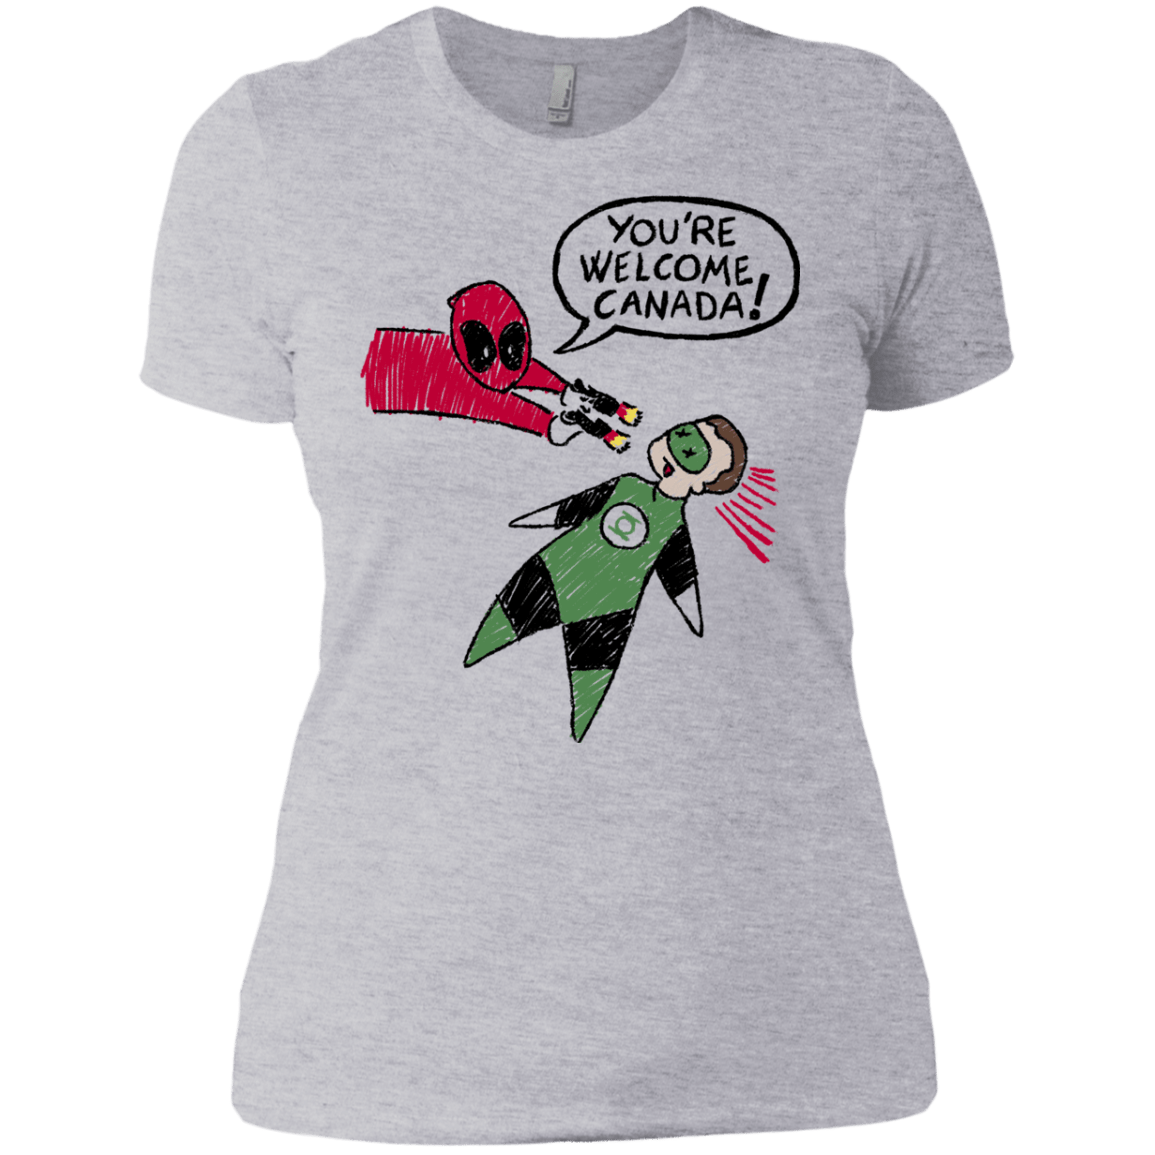 T-Shirts Heather Grey / X-Small Youre Welcome Canada Women's Premium T-Shirt